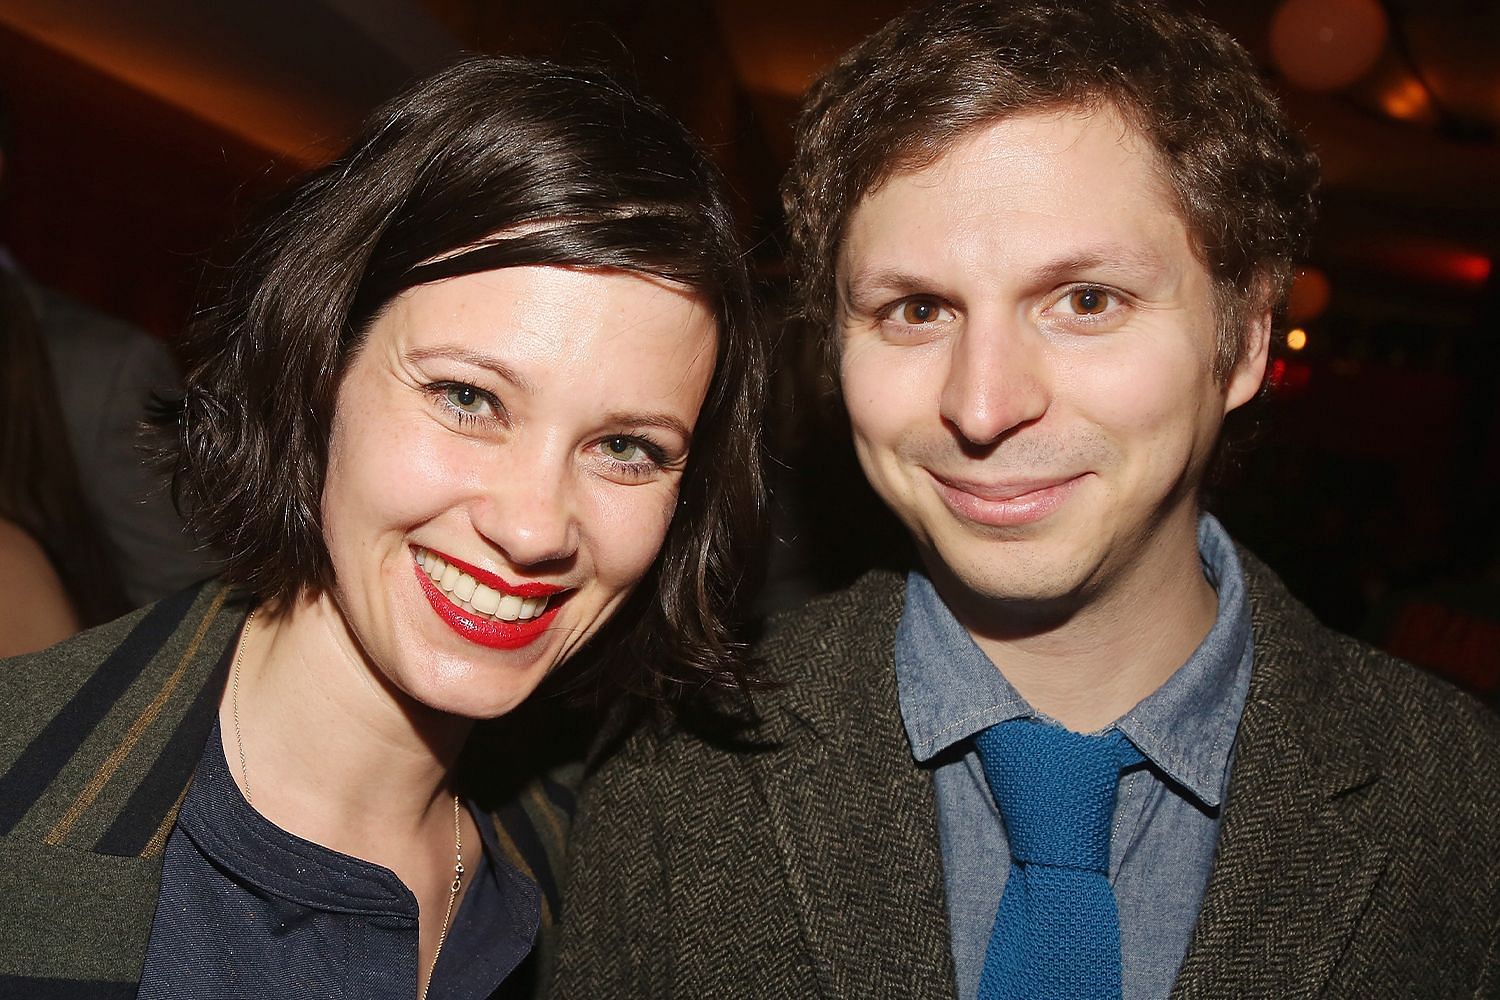 Michael Cera and Nadine (Image via Getty Images)